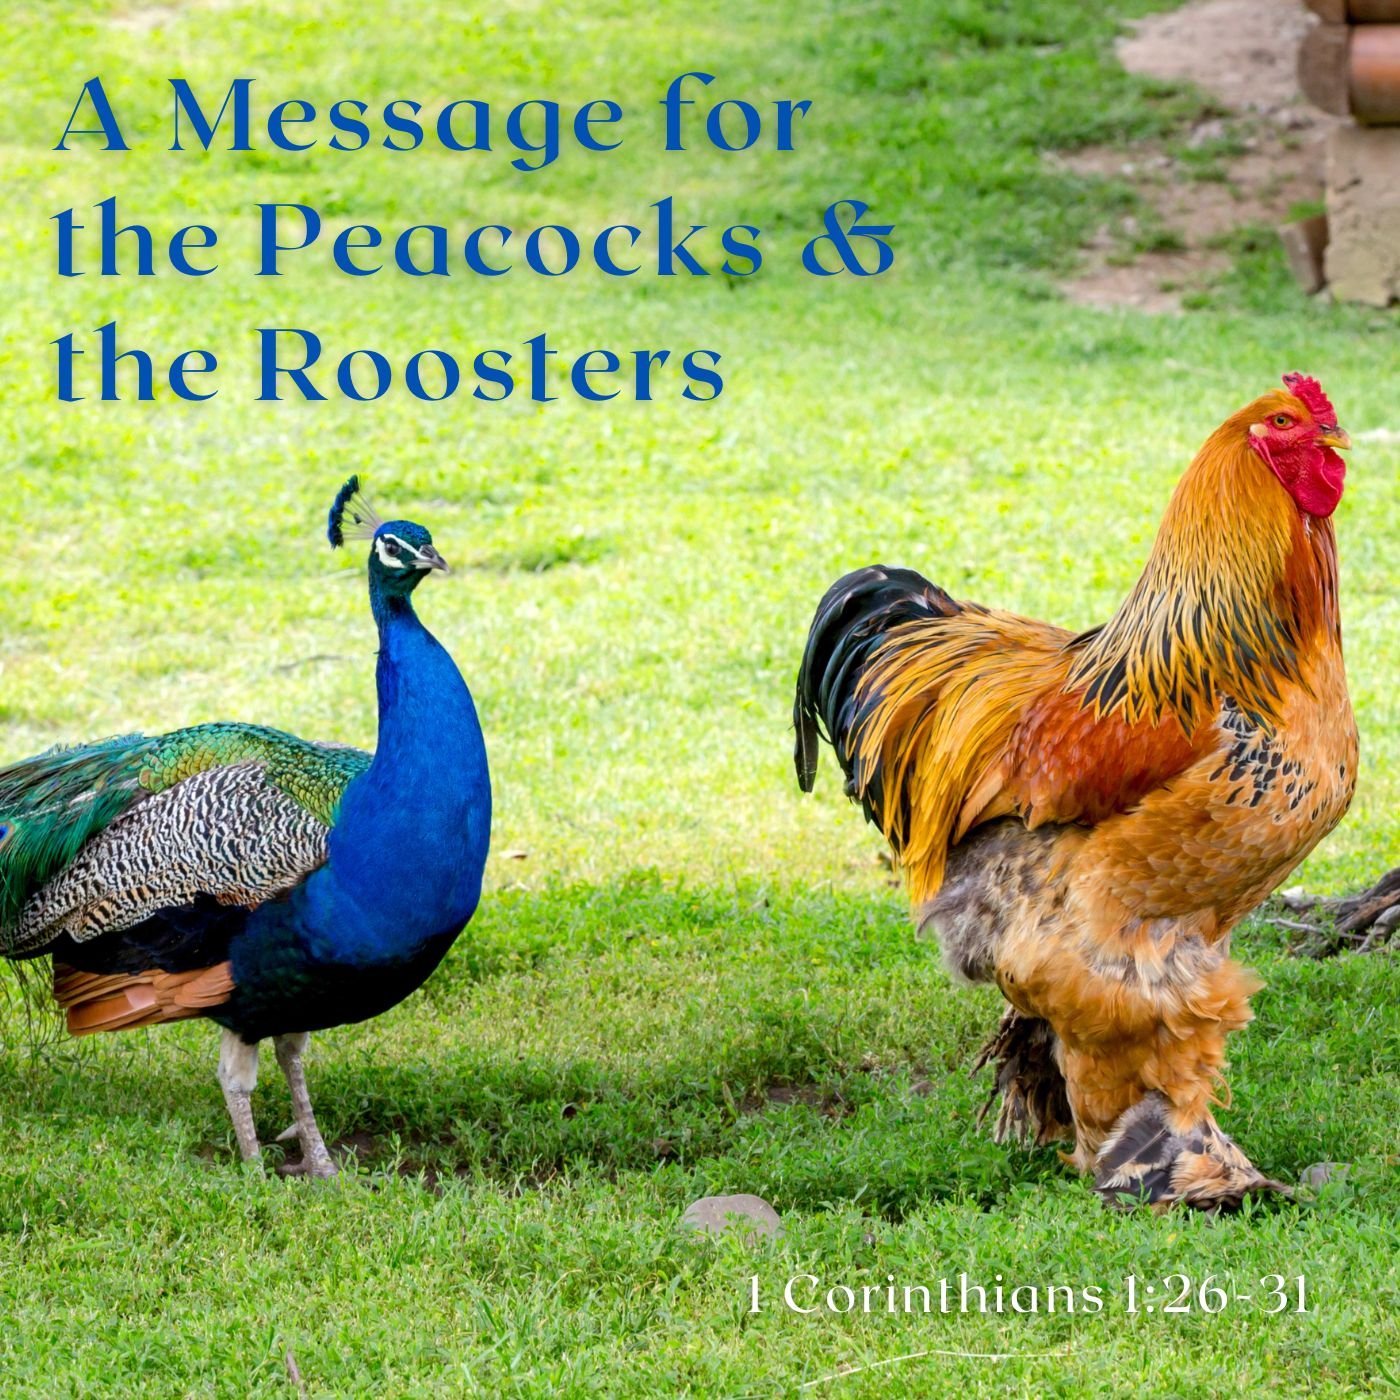 Apr 11, 2024 | A Message for the Peacocks and the Roosters (Part B)